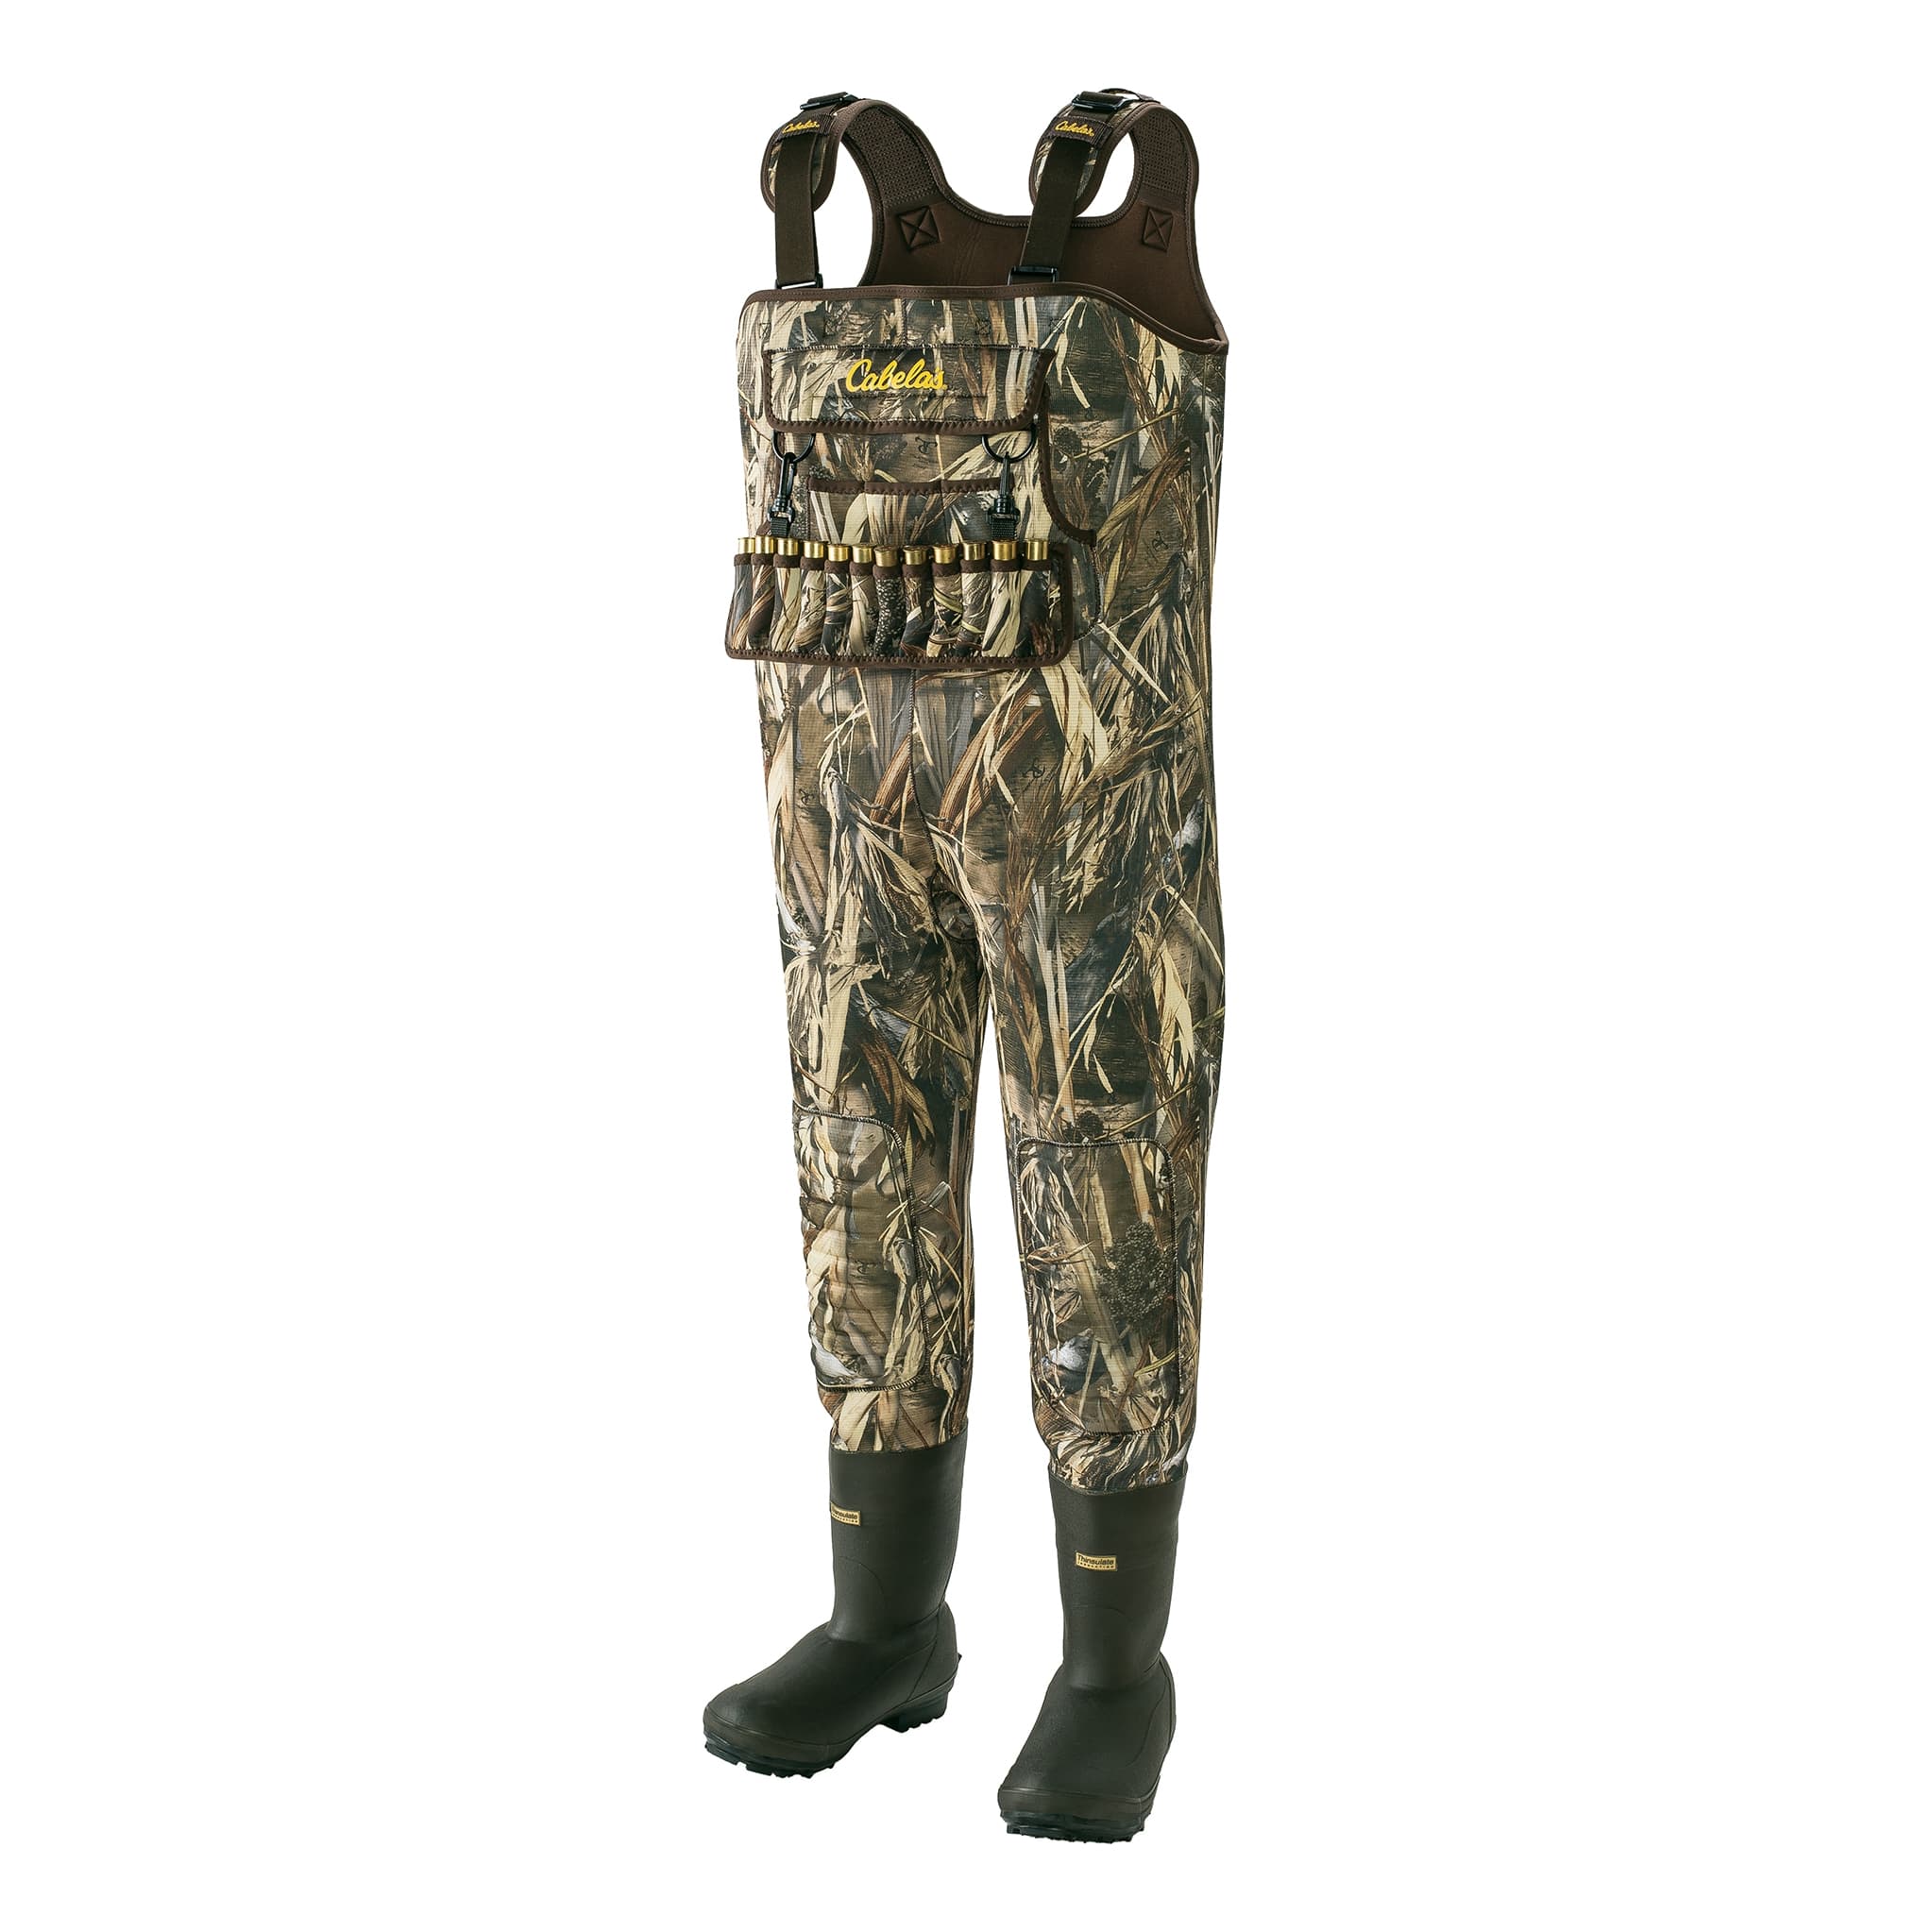 12 Size Fishing Waders for sale